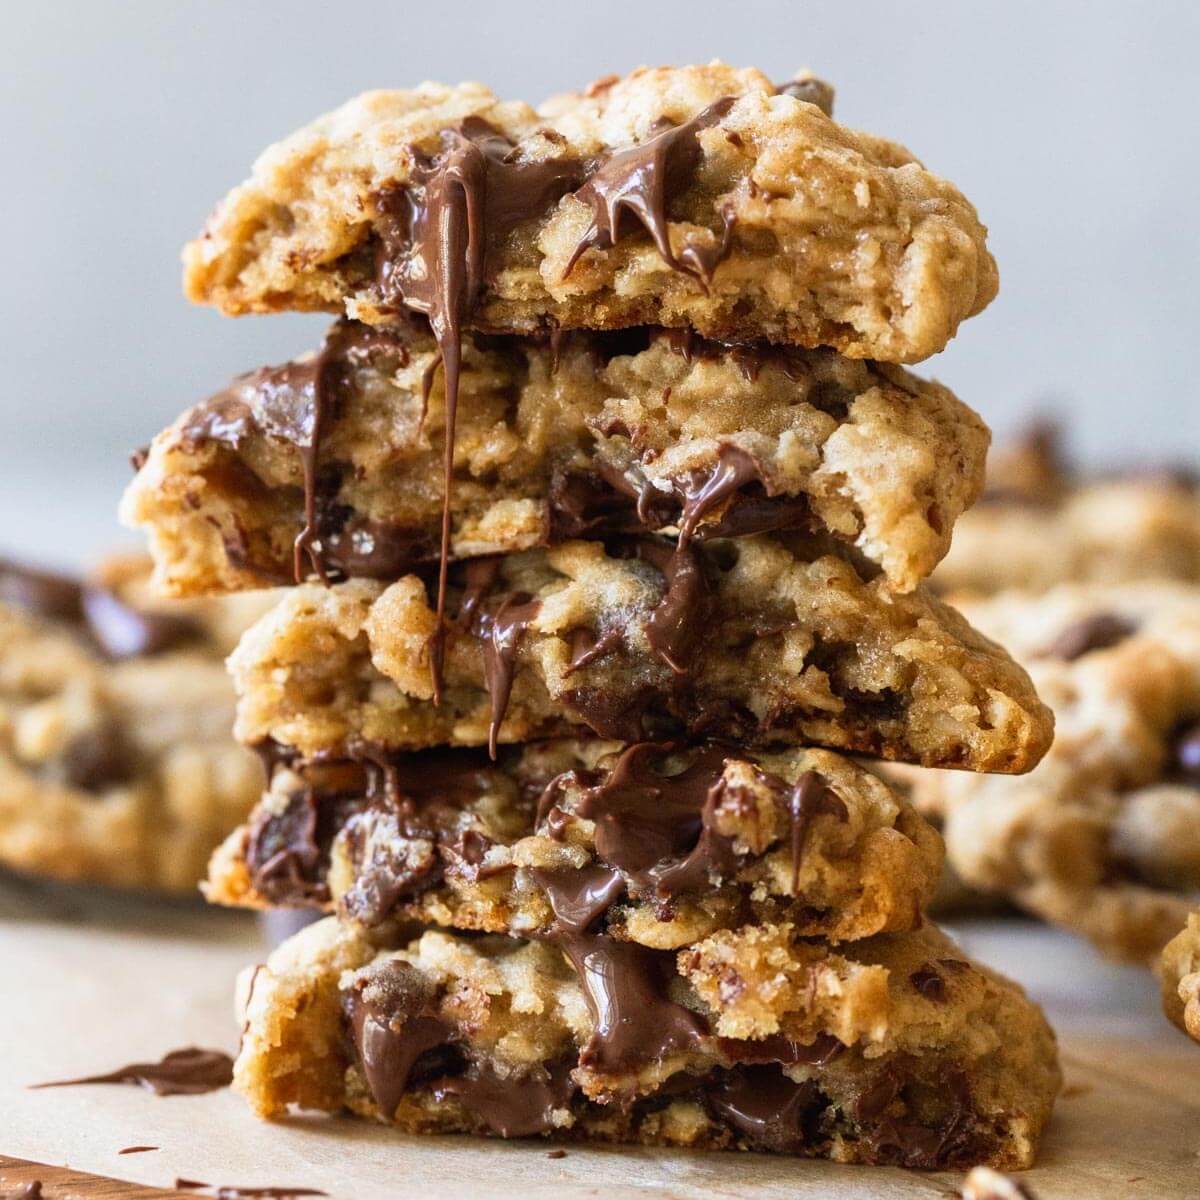 Super Saver - Recipe: Chewy Oatmeal Chocolate Chip Cookies